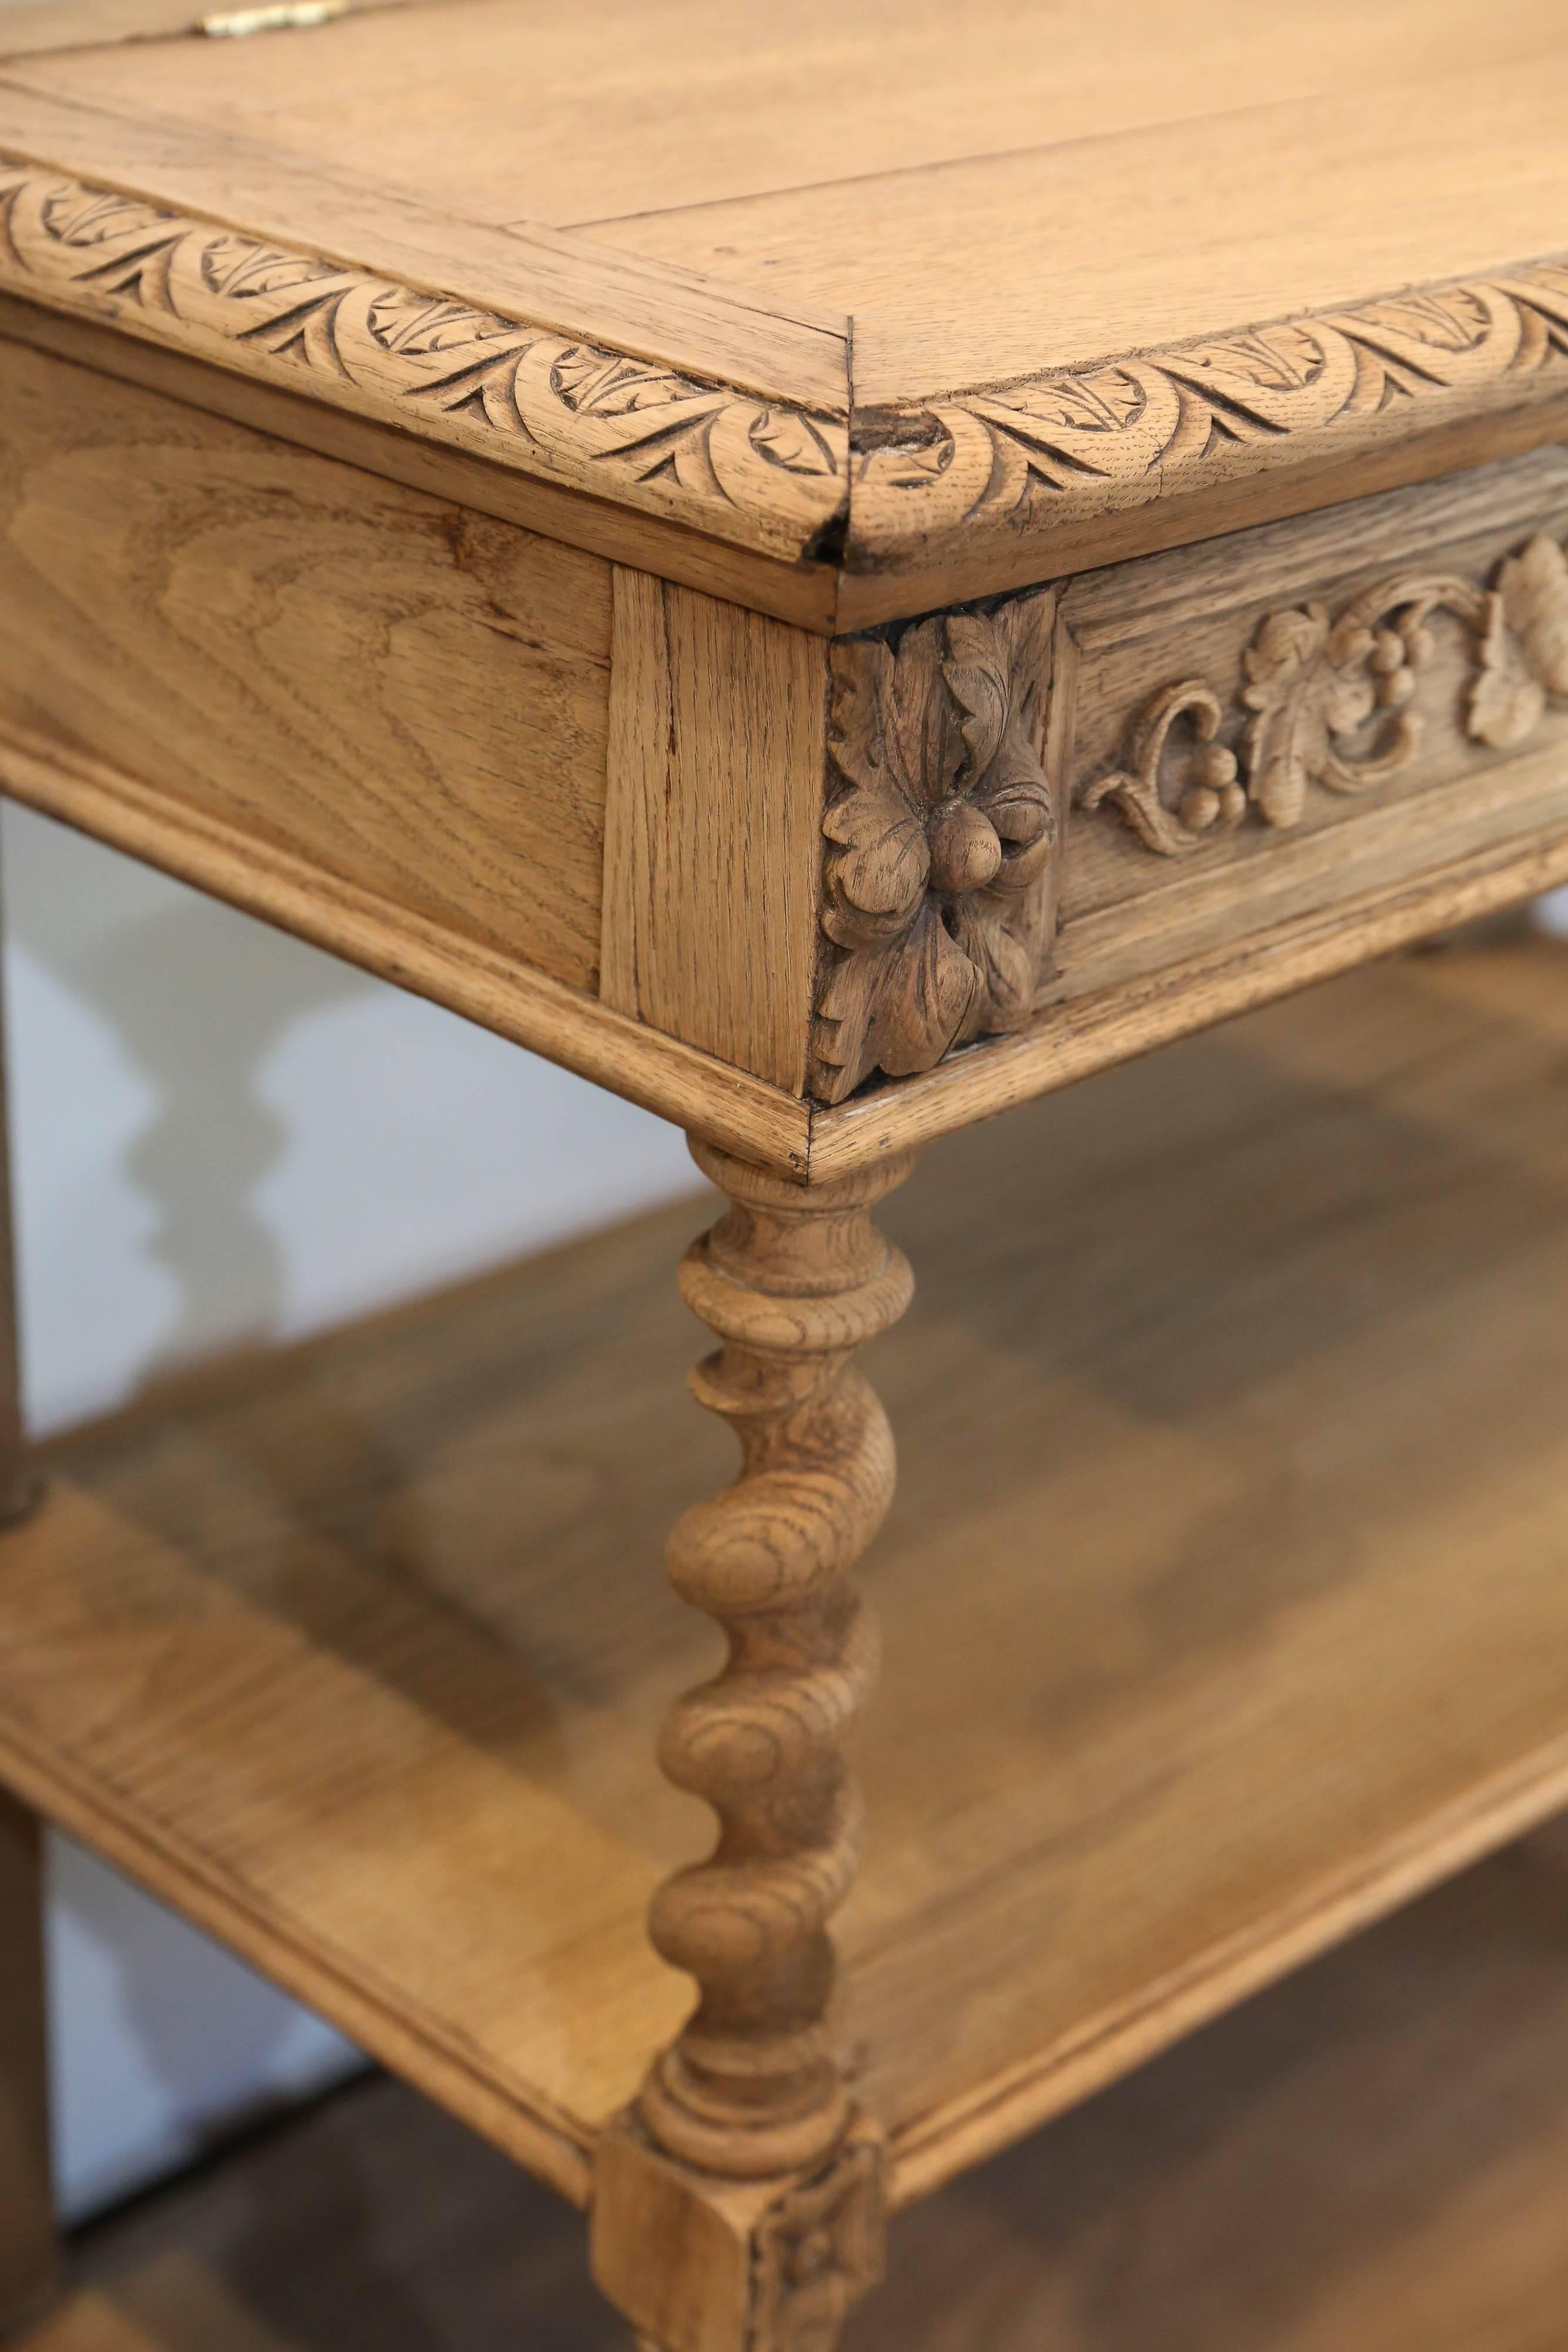 This is an exceptionally beautiful dessert table in hand-carved oak with wonderful spiral legs and a wine grape and leaf motif. The top is hinged and lifts into place with two carved supports. The marble top underneath is a wonderful charcoal gray